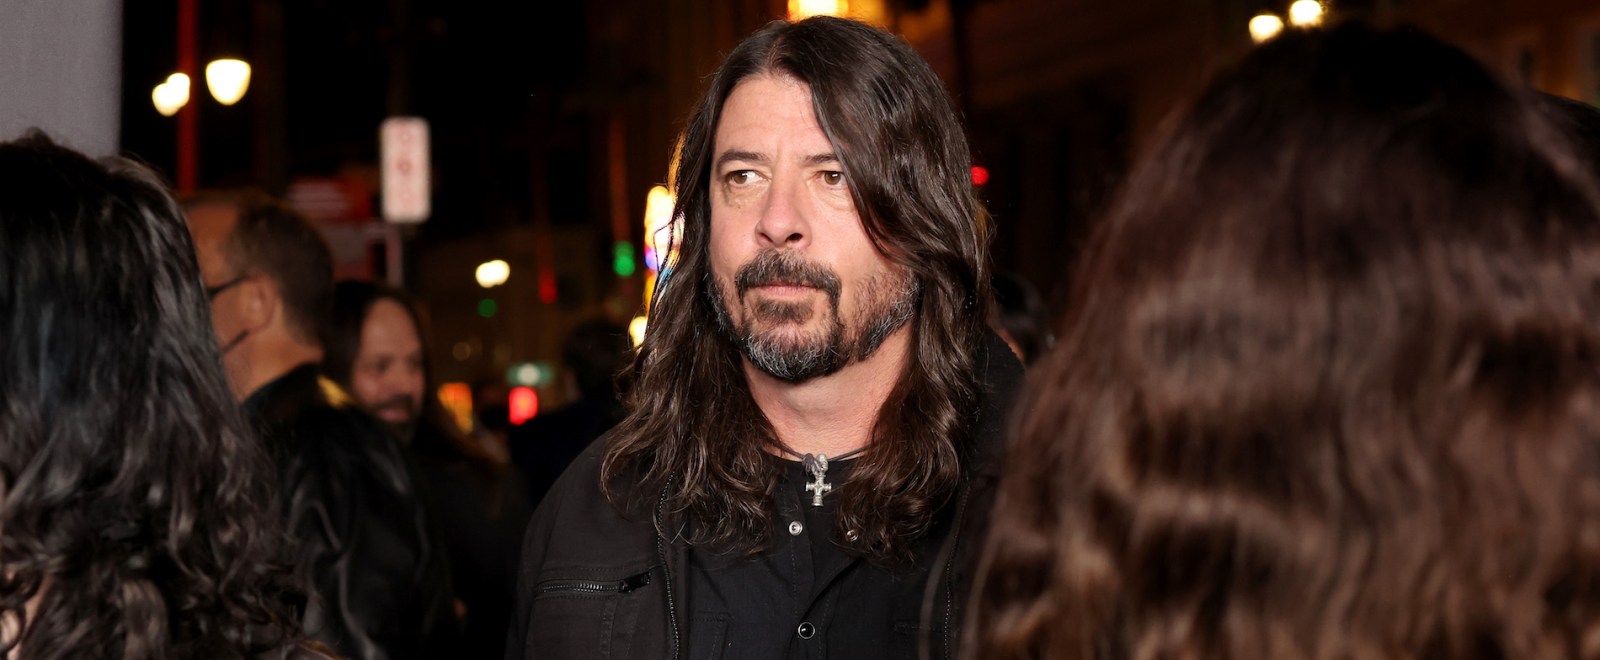 Dave Grohl Foo Fighers 2022 Studio 666 Premiere